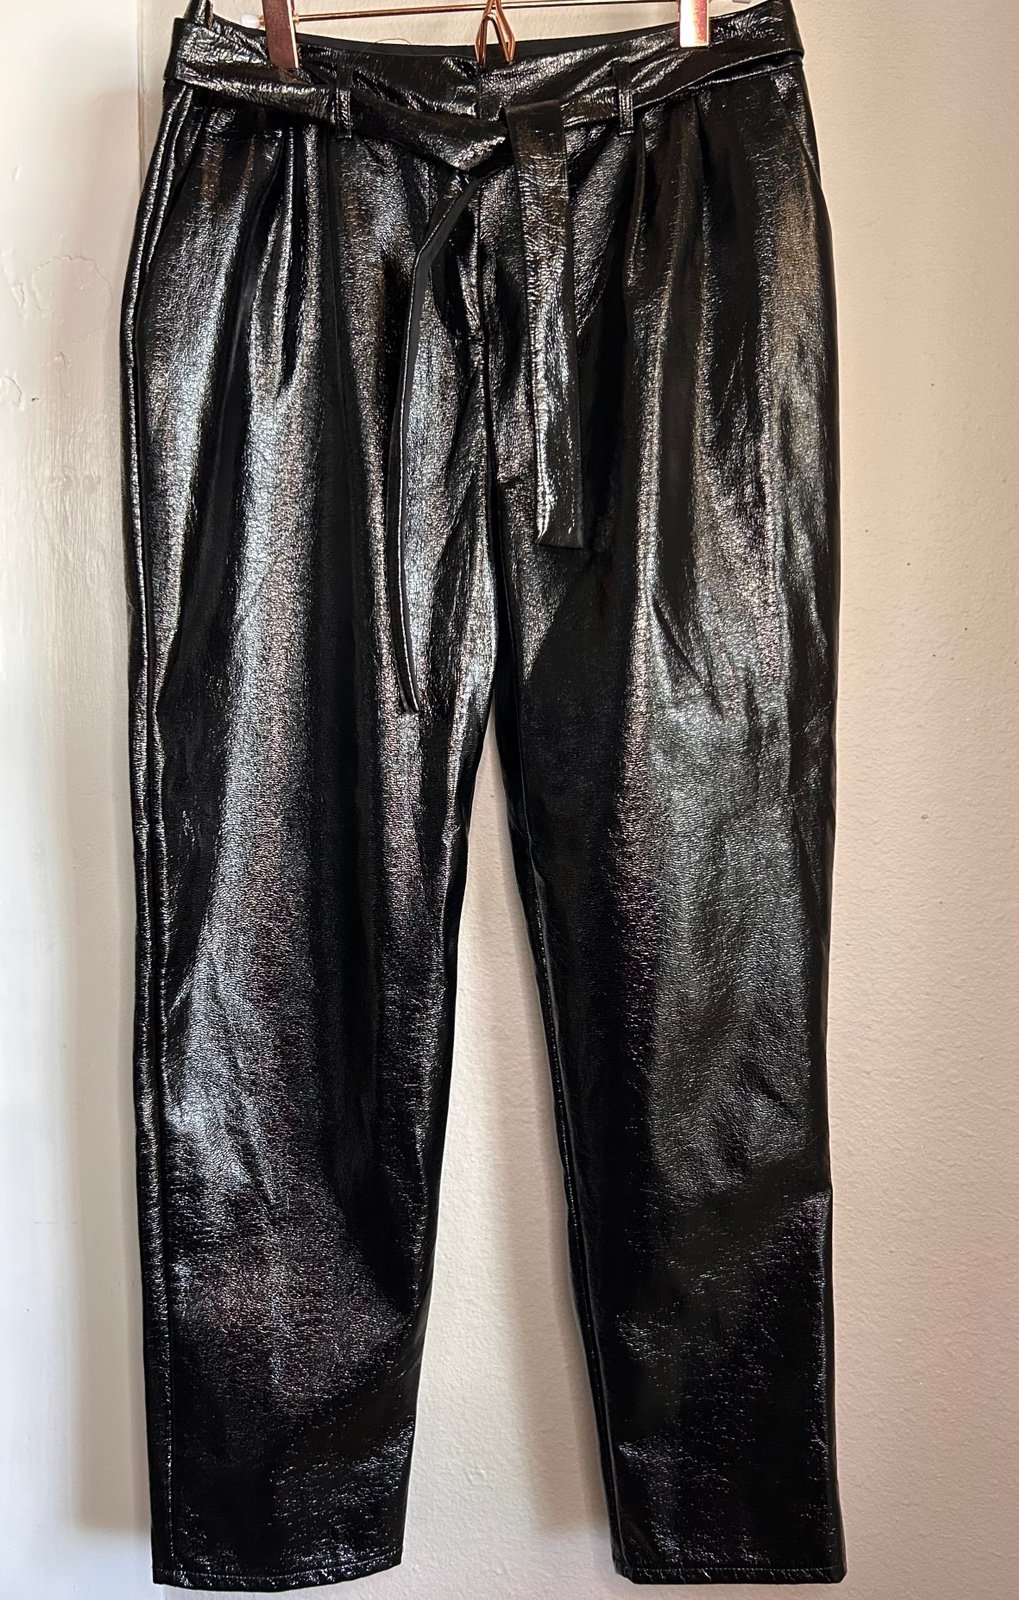 big discount Who What Wear High Waisted Belted Faux Leather Black Pants Size 4 k8ixGGVX3 Factory Price